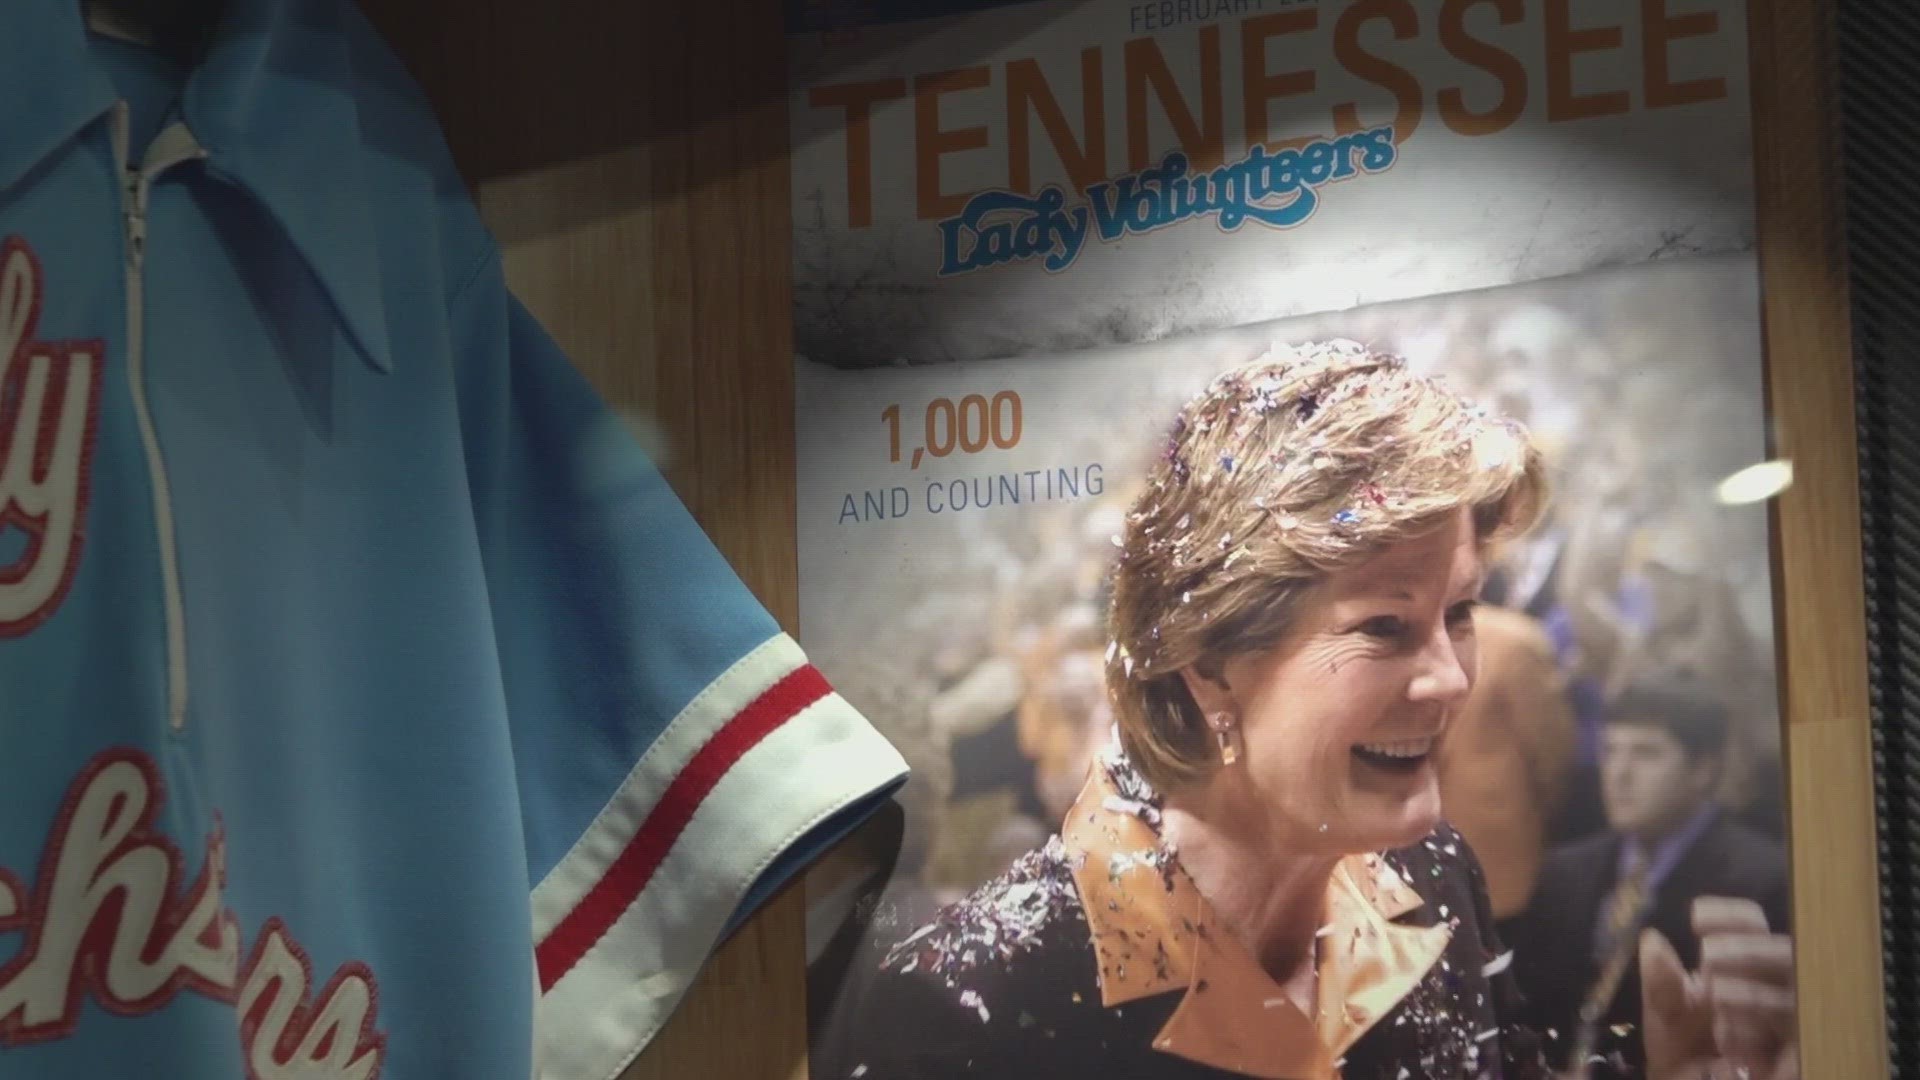 On the eve of game day for the Lady Vols, we take a look at their legacy and the impact they have made as a team.